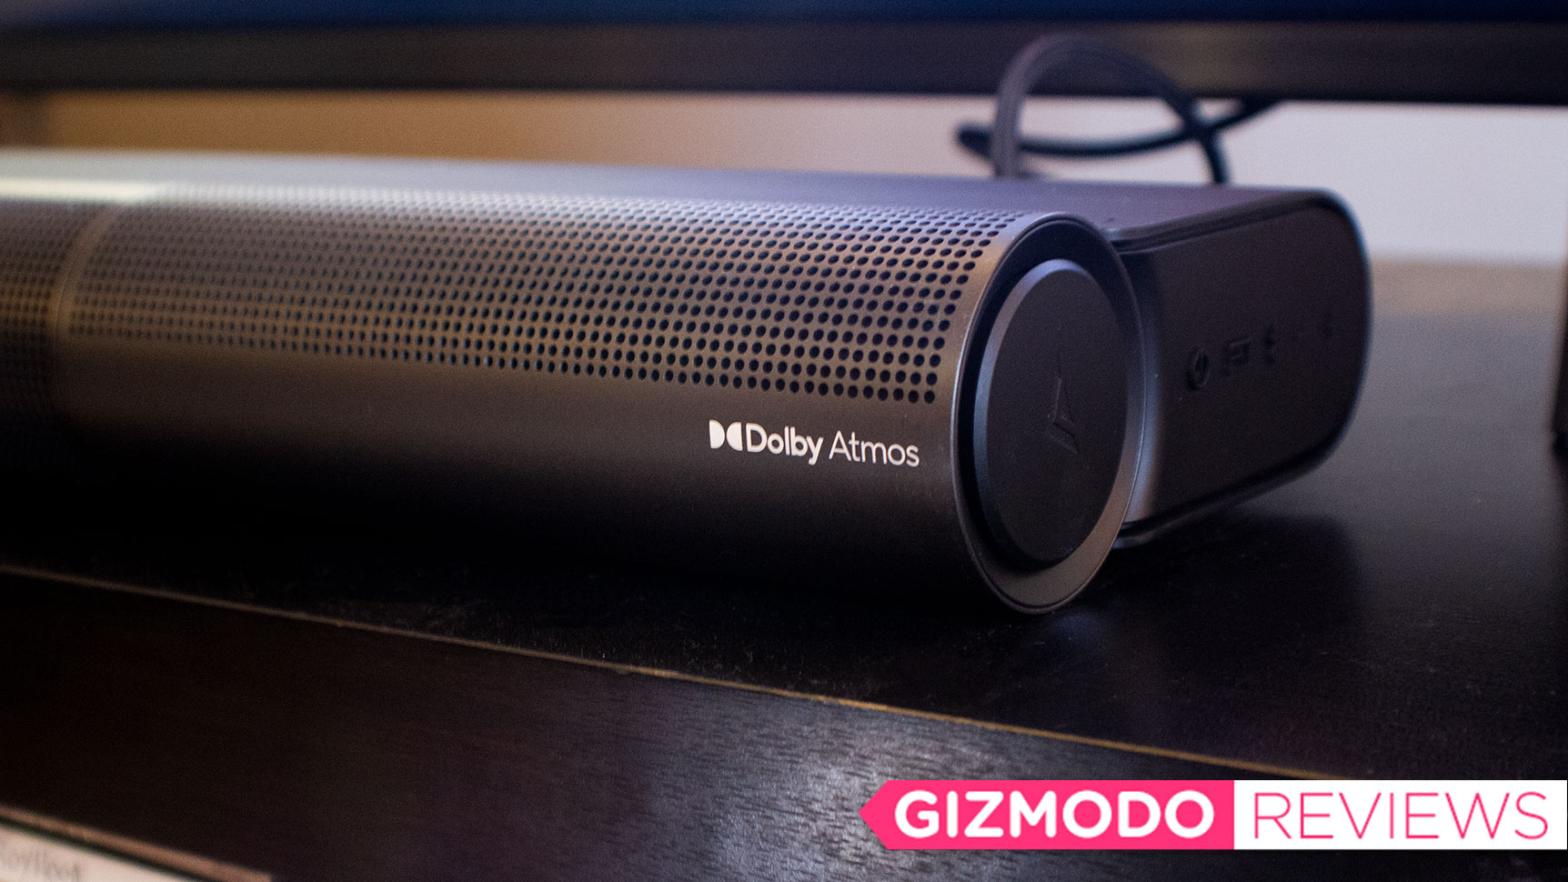 This boy rotates up whenever the soundbar detects Dolby Atmos content. (Photo: Victoria Song/Gizmodo)